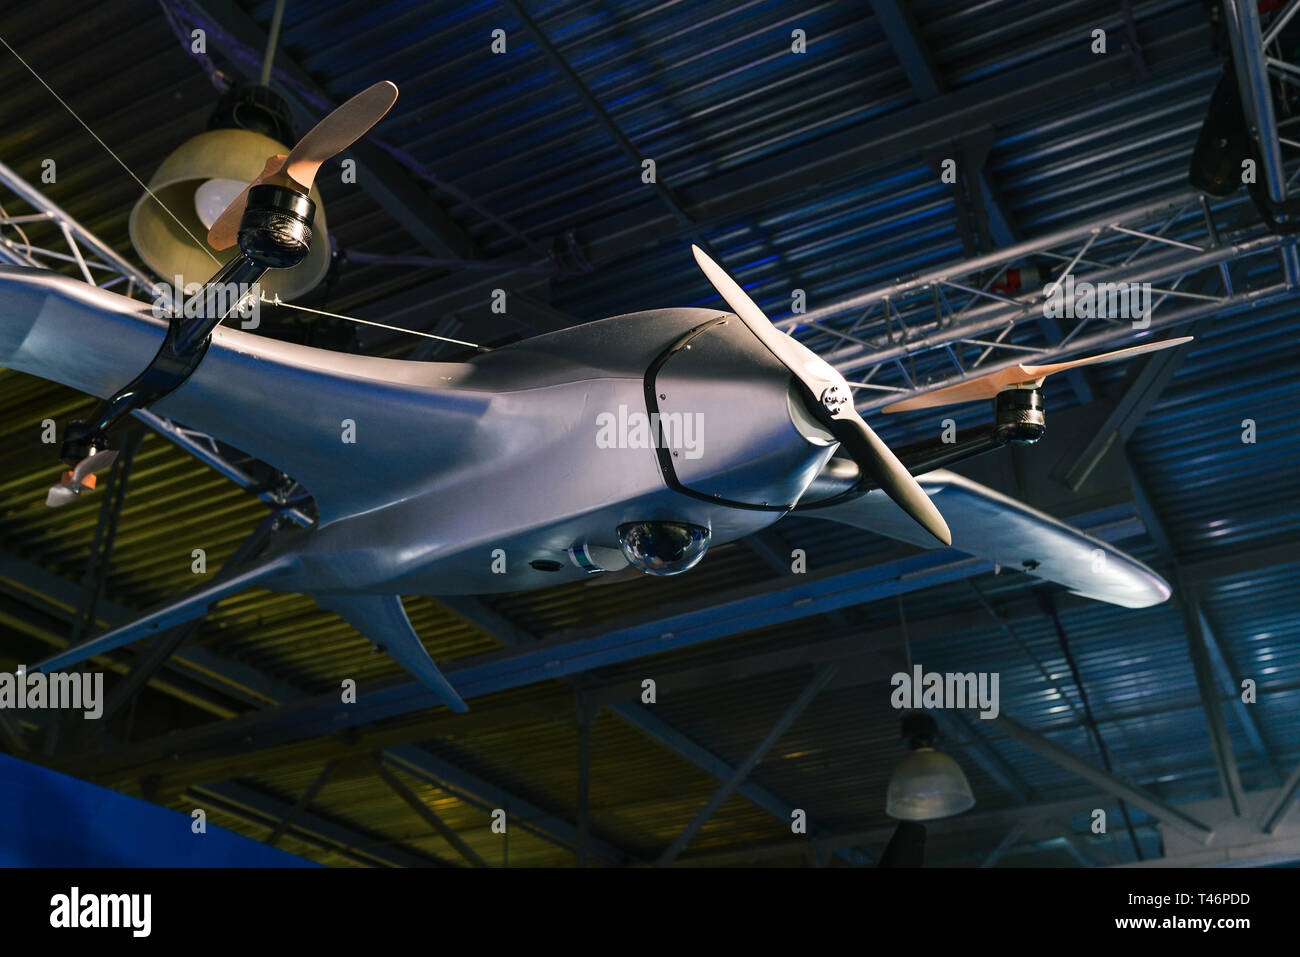 Unmanned aerial vehicle. Unmanned military aircraft. Drone in hangar Stock Photo